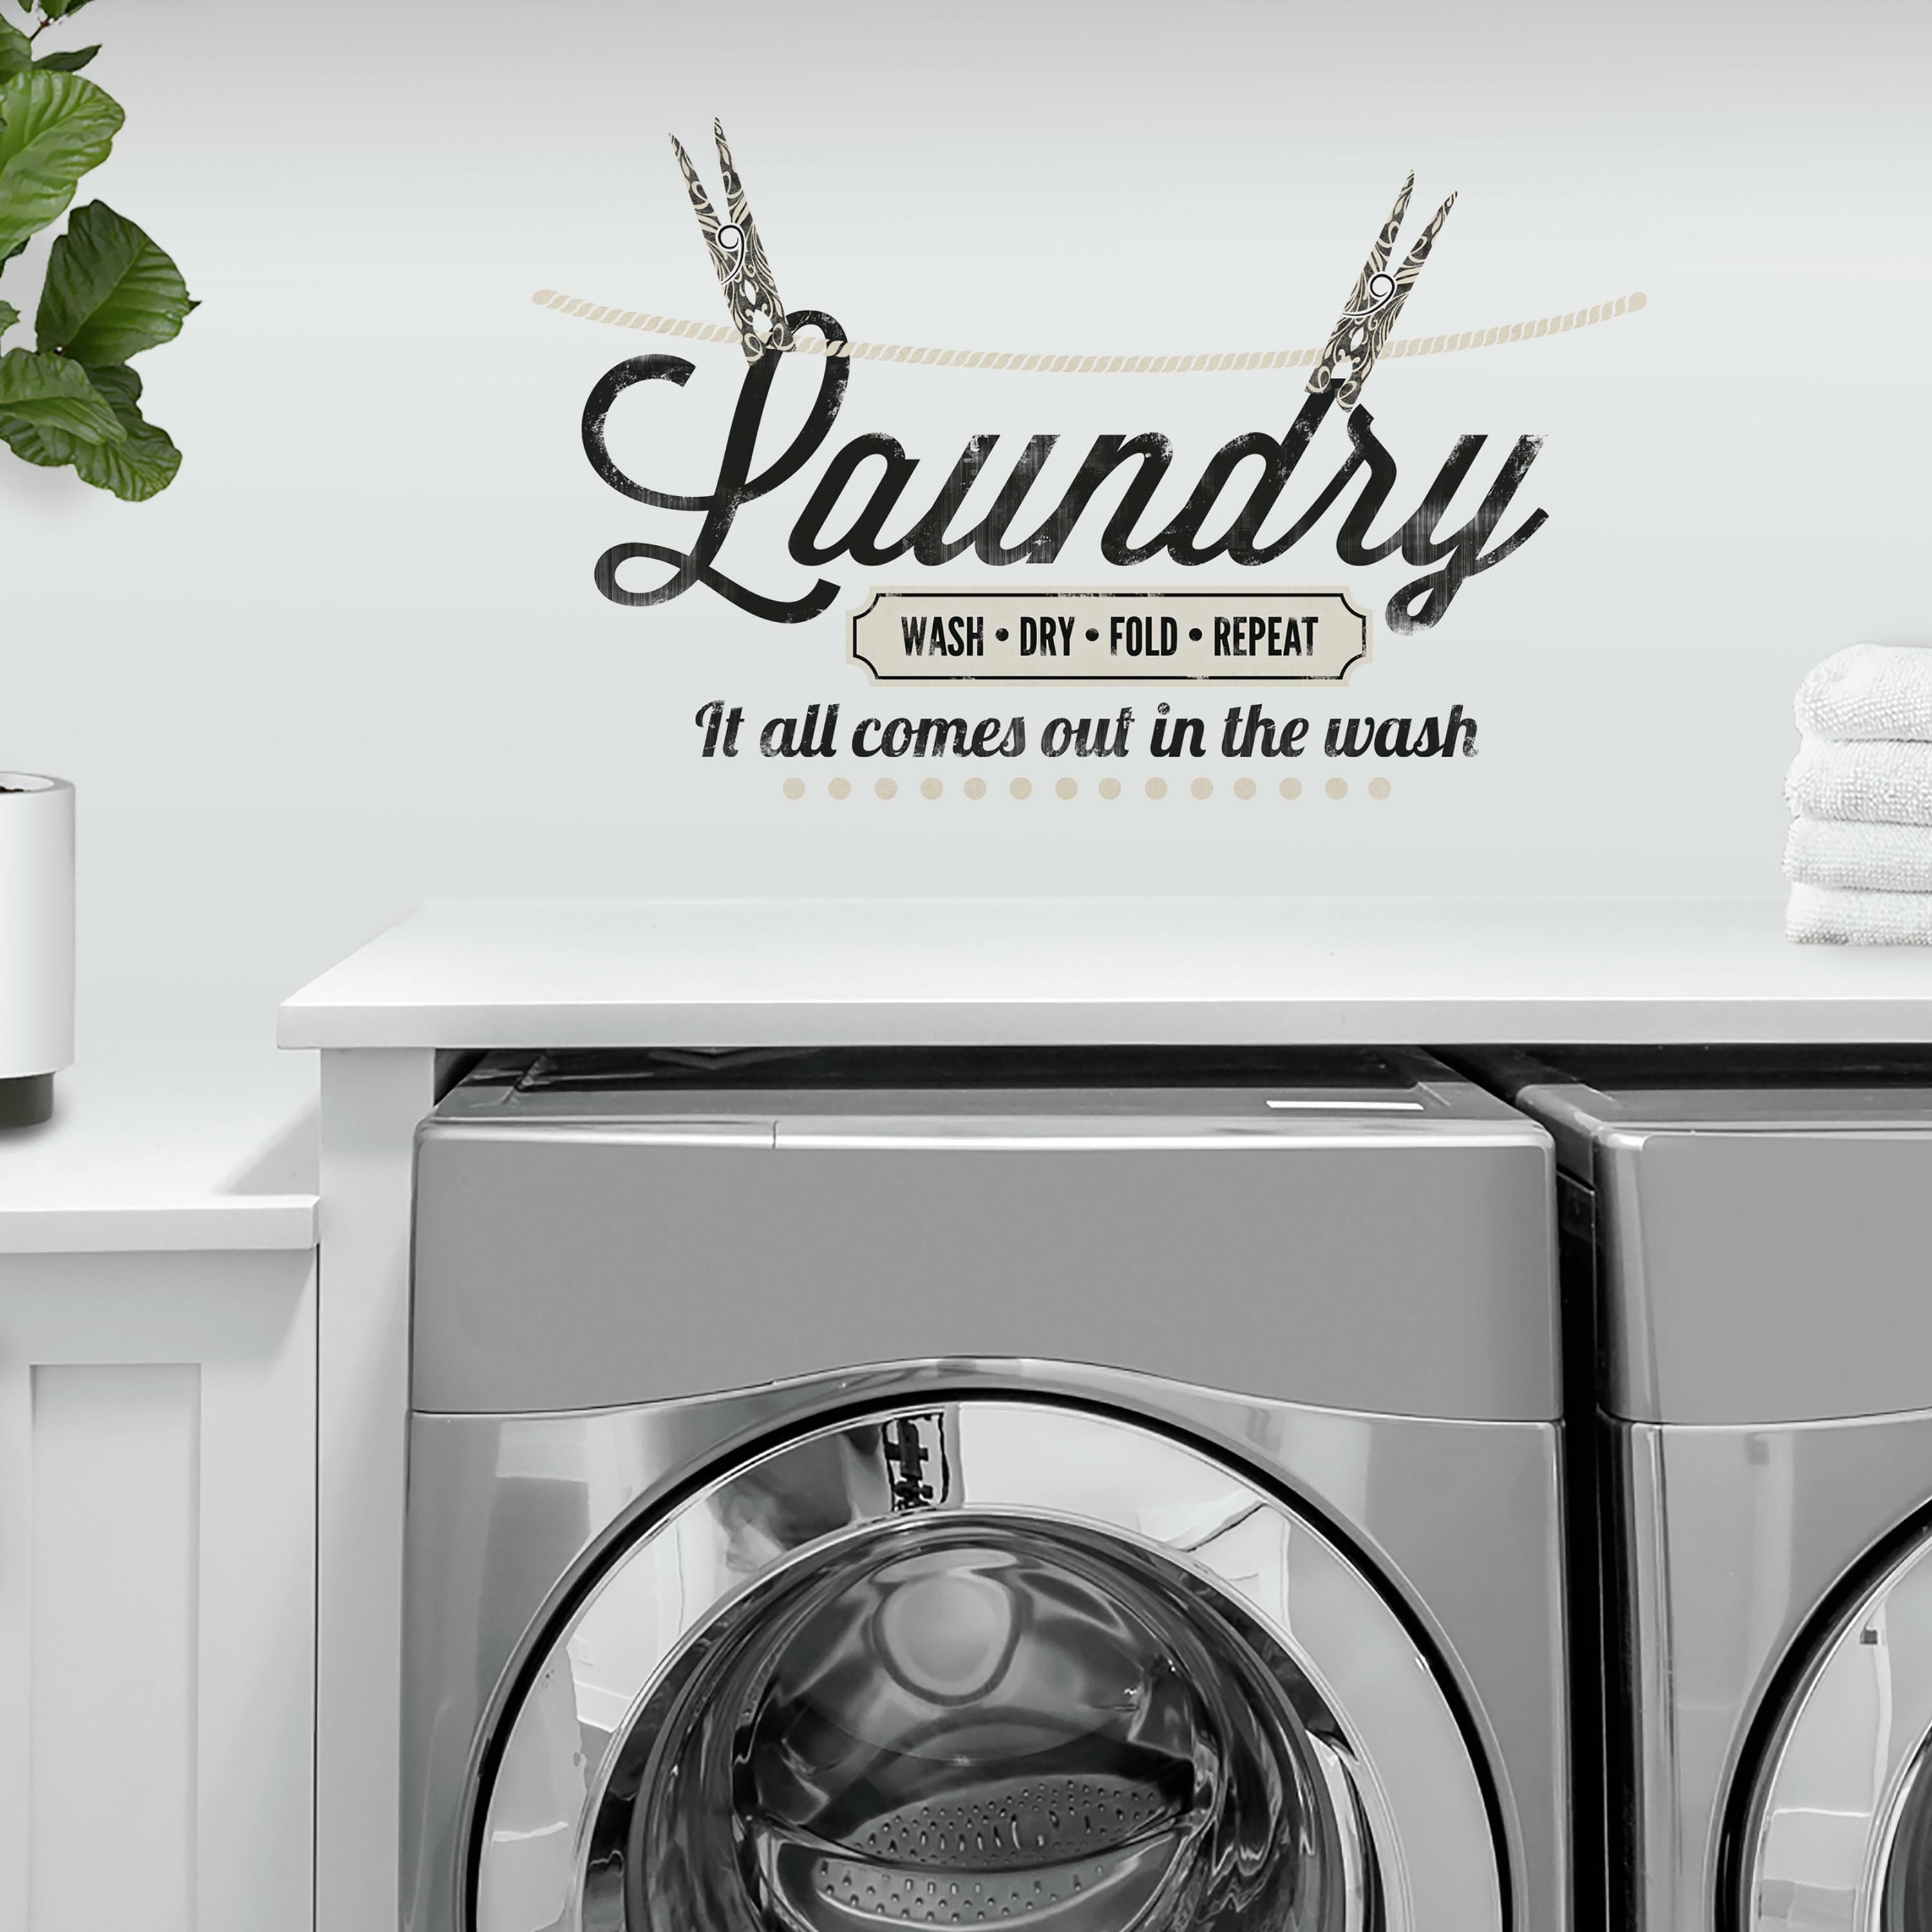 Laundry Room Vinyl Wall Decal Laundry Signs Wall Sticker Bubble Wall Décor Saying Wash Dry Fold Repeat Art Wall Quote Sticker for Decoration Supplies. 